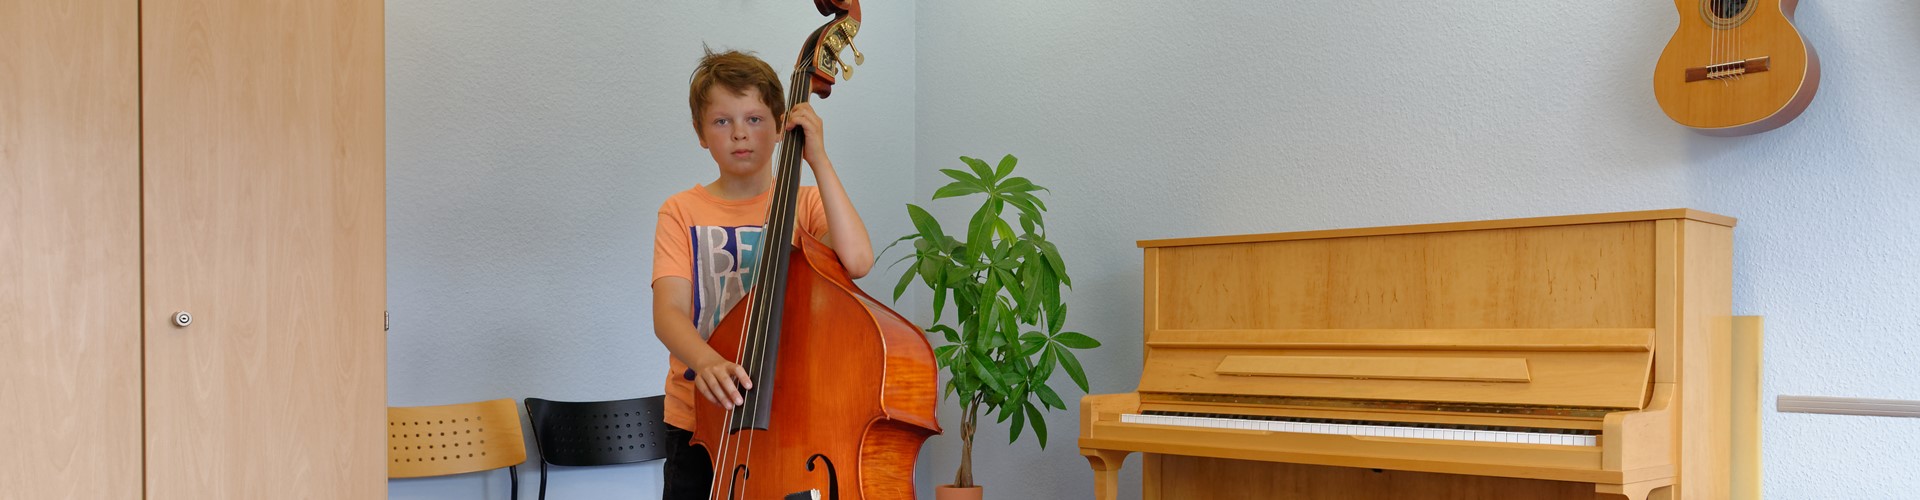 Learn Contrabass, Contrabass lessons